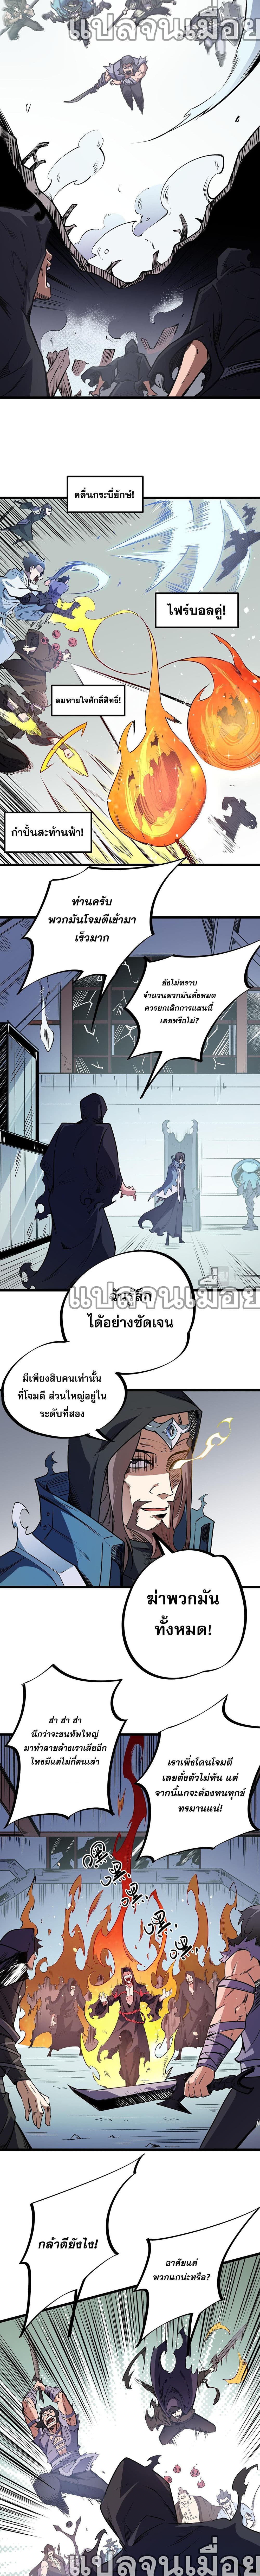 Job Changing for the Entire Population: The Jobless Me Will Terminate the Gods ฉันคือผู้เล่นไร้อาชีพที่สังหารเหล่าเทพ 50-50